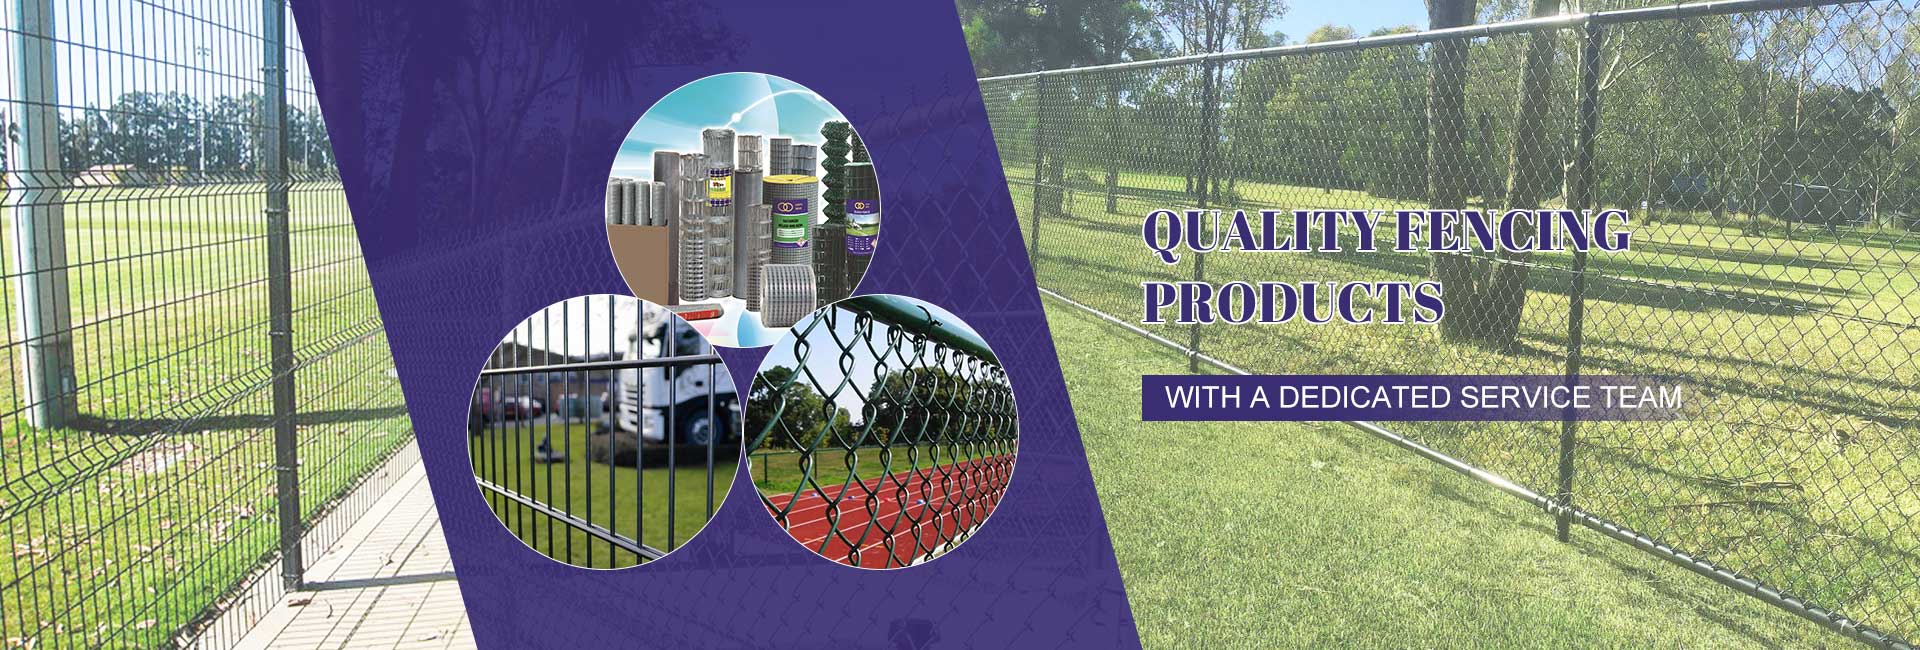 Quality Fencing Products 